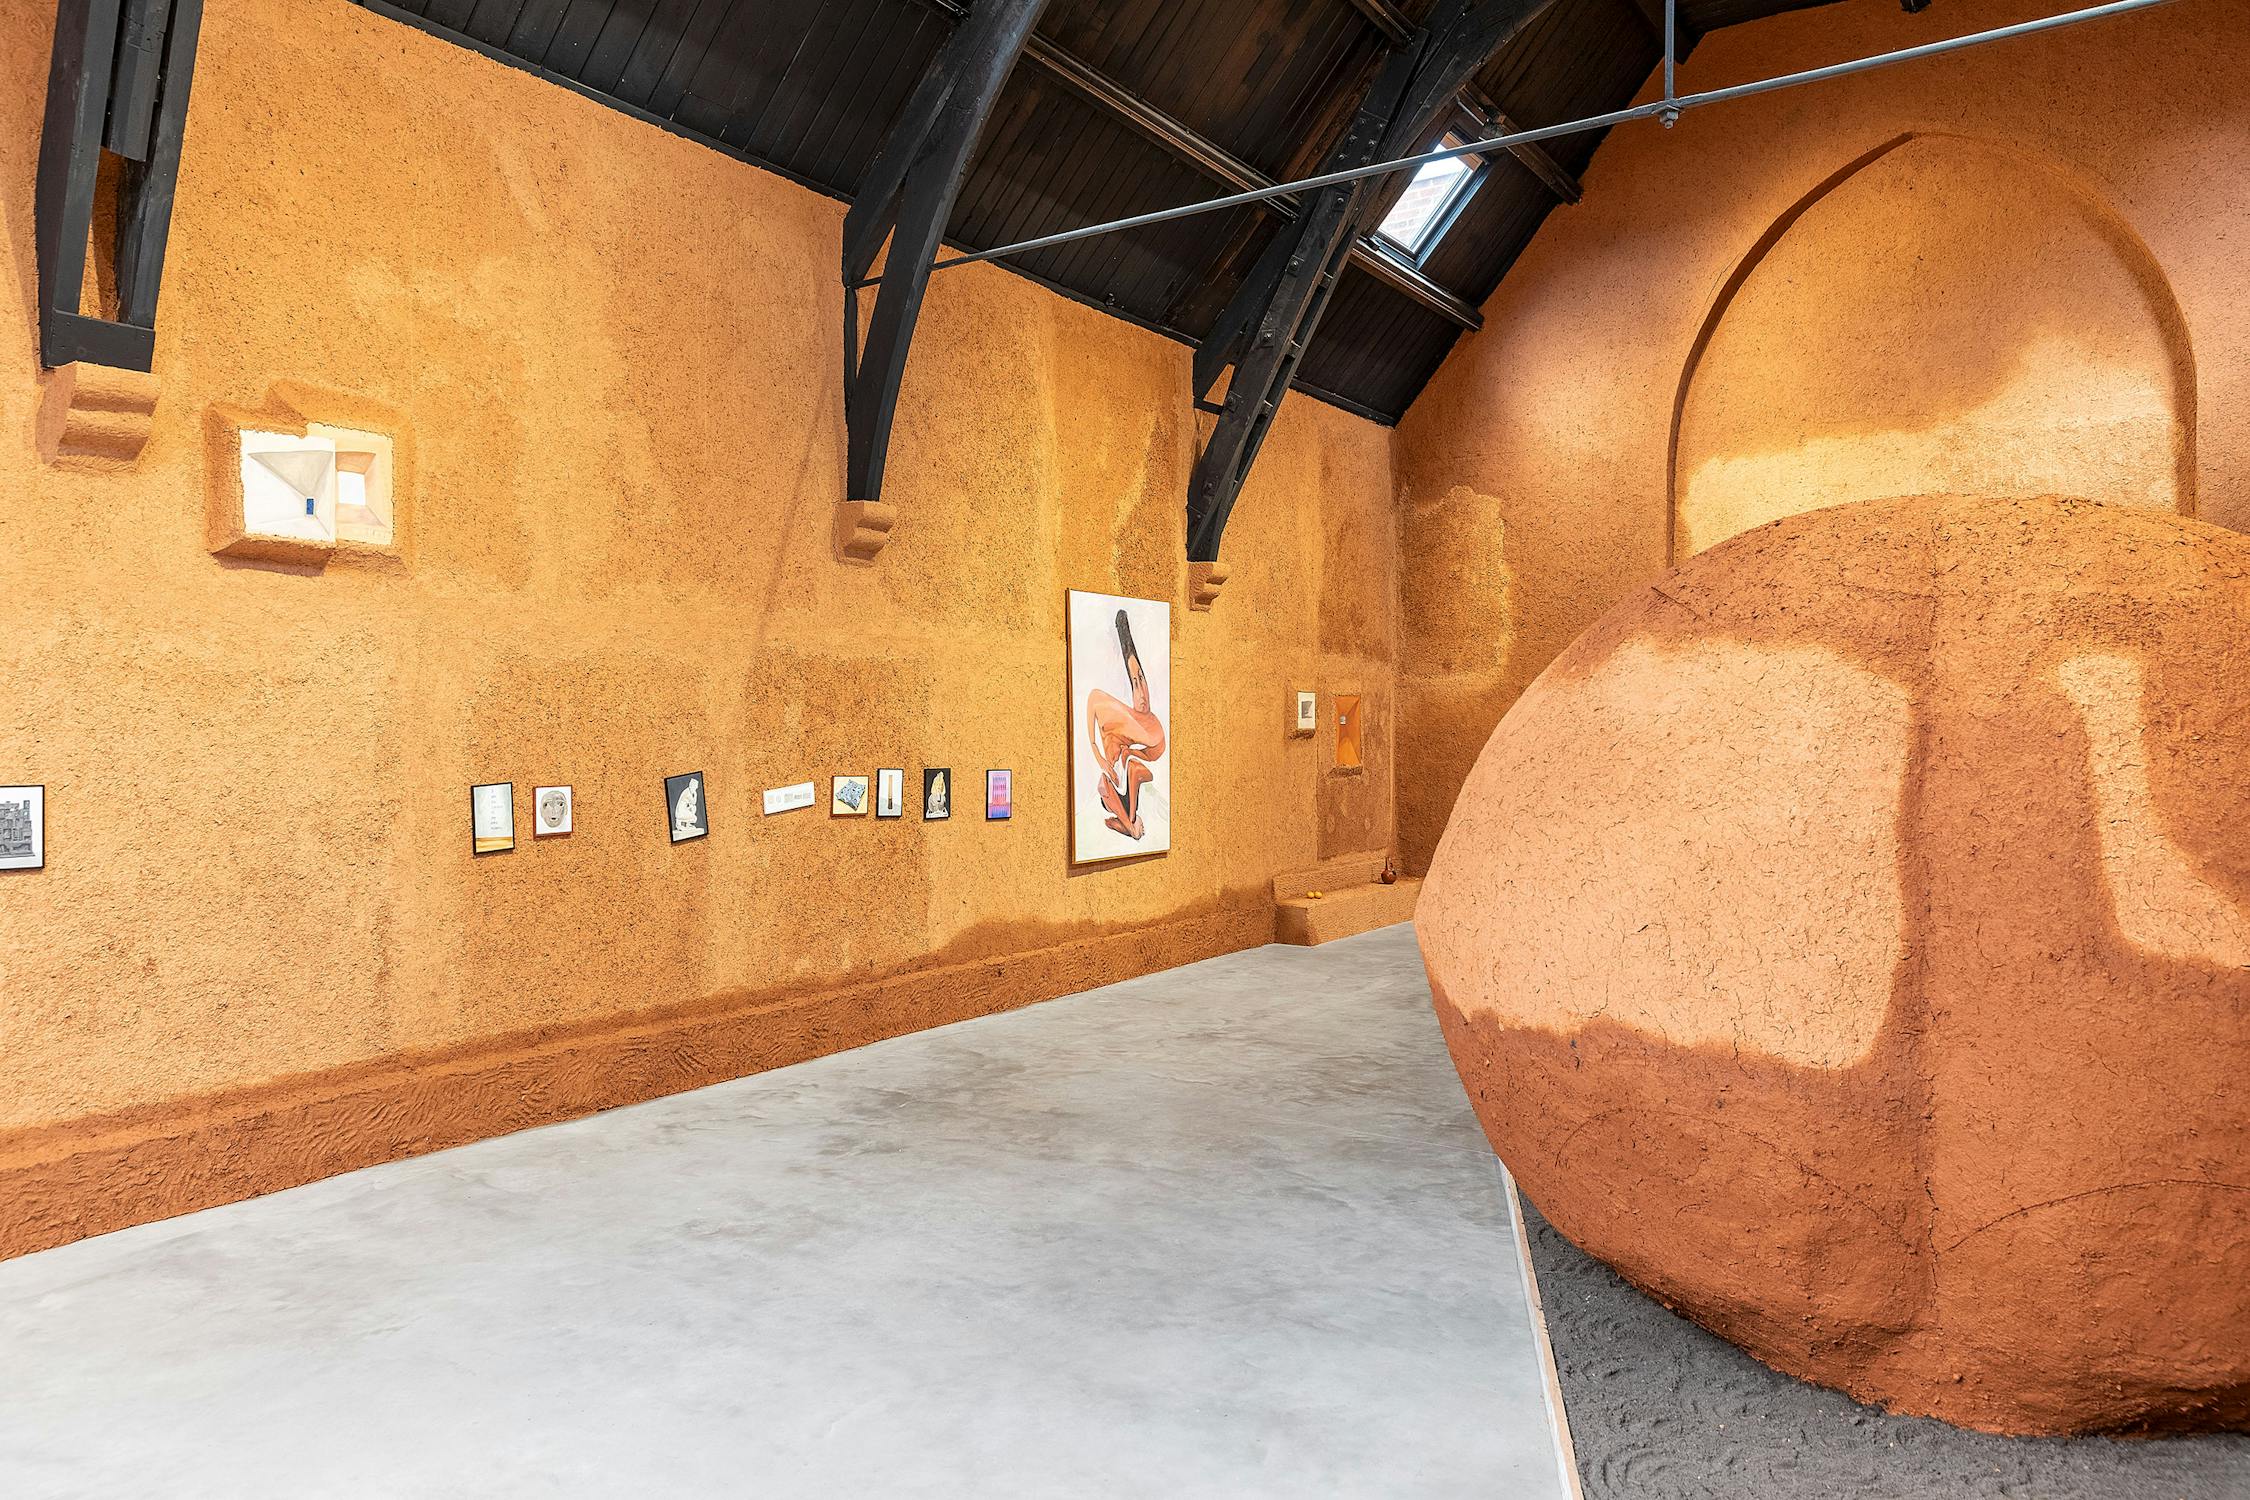 A gallery with walls entirely covered in terracotta coloured mud clay, with a vaulted black ceiling. In the centre of a room stands a large round sculpture made of mud clay, sitting in a raised bed of brown earth. Small paintings of publicly held artworks are arranged on the walls